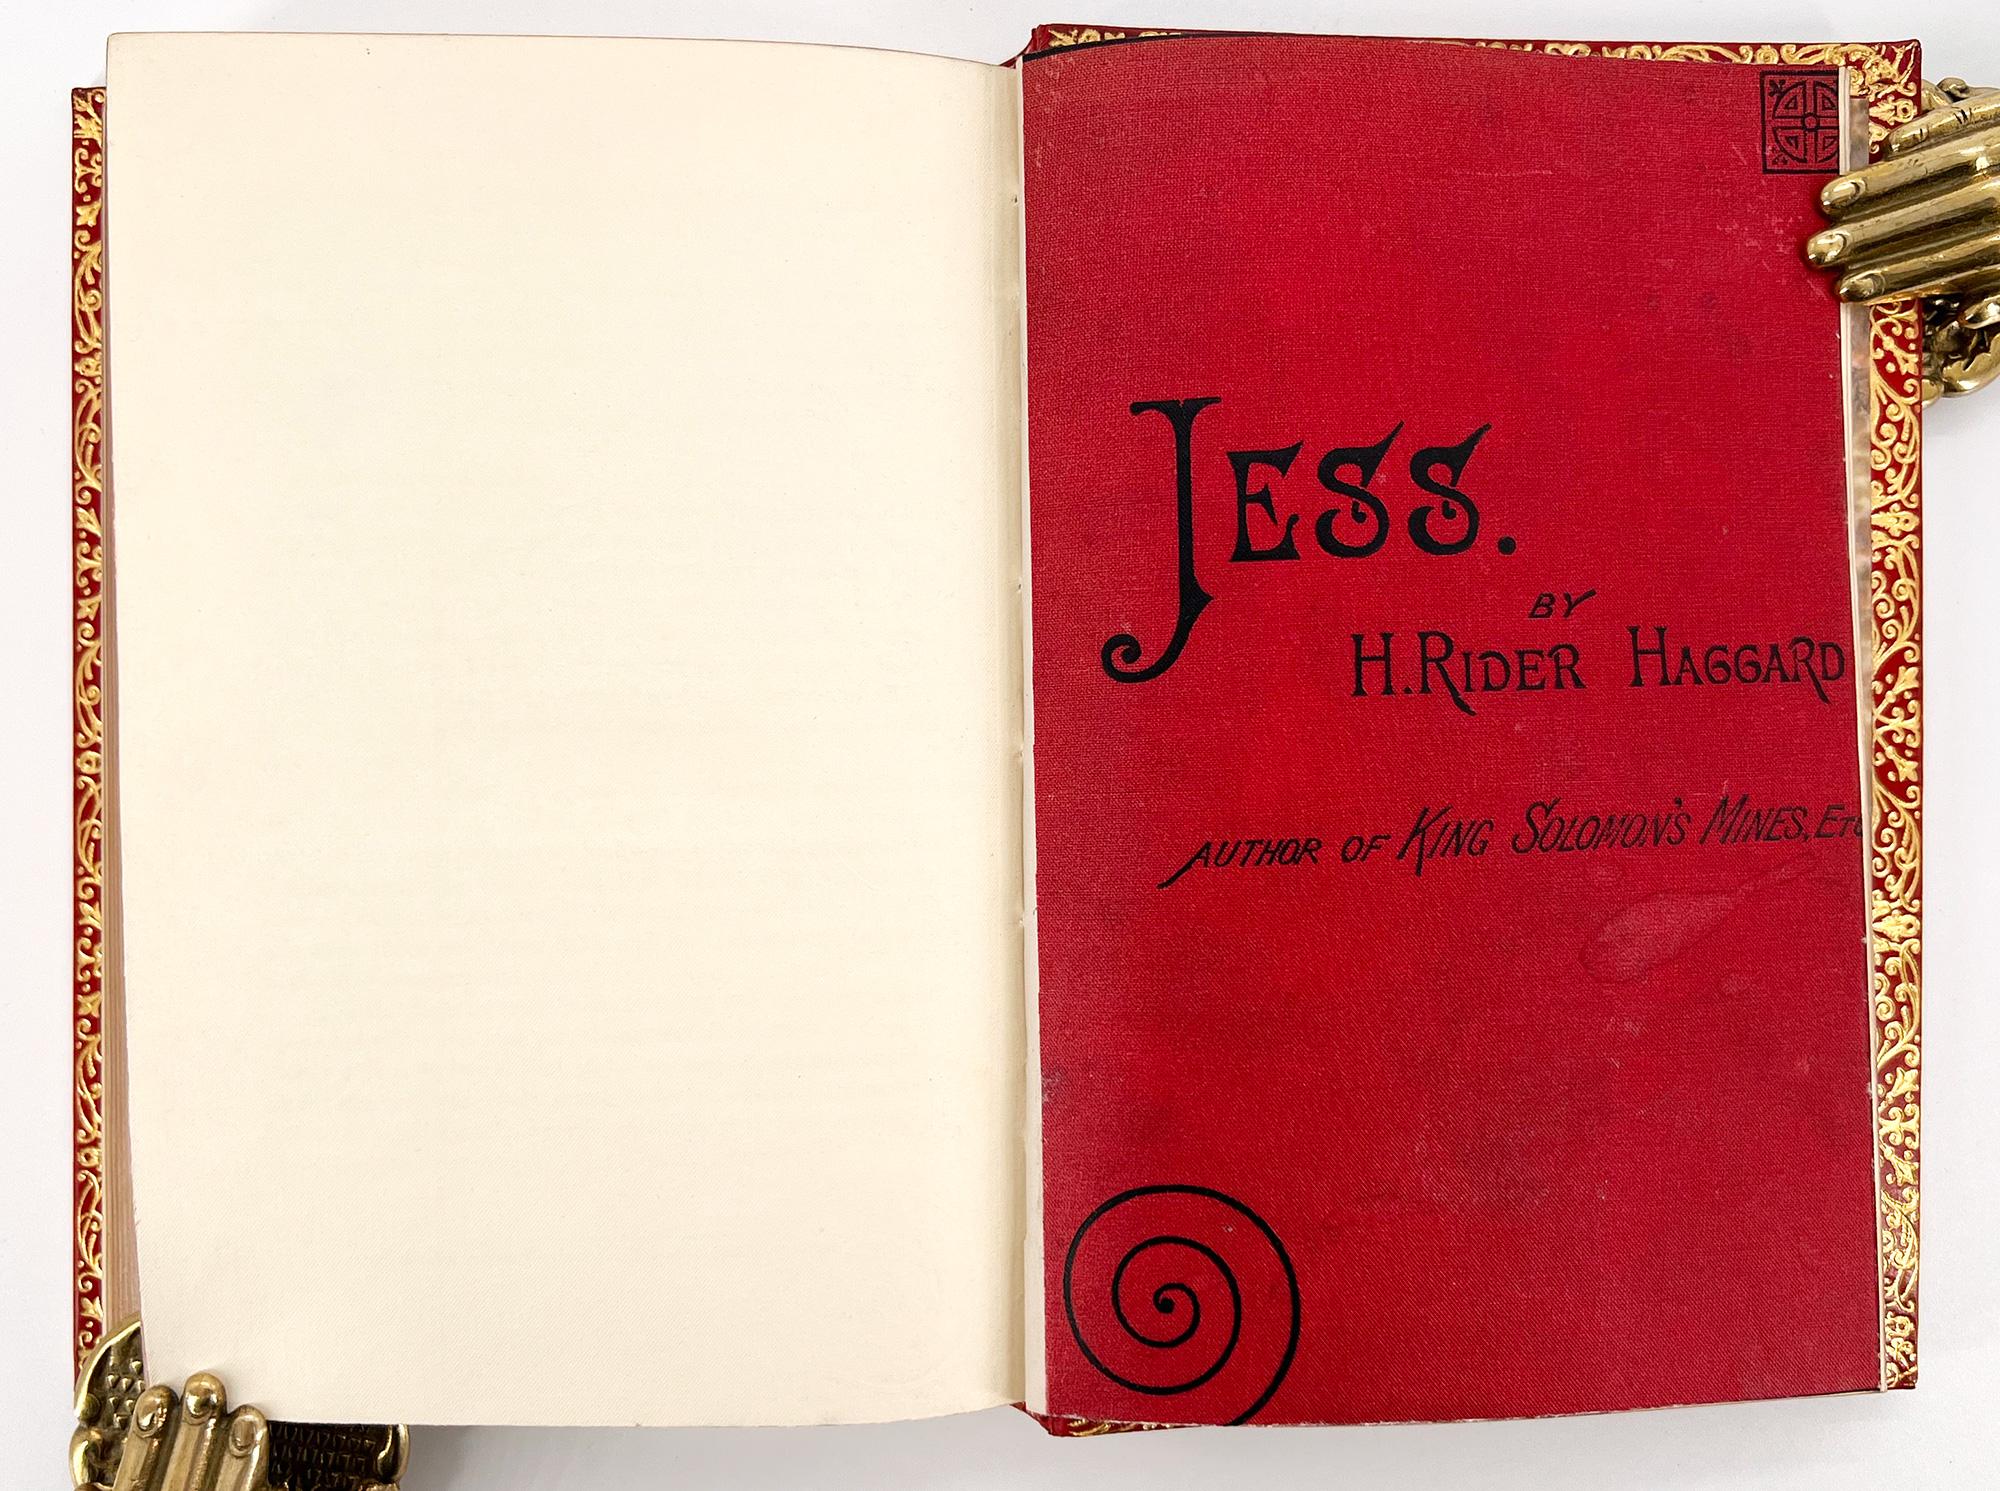 Leather Jess by H. Rider HAGGARD in a Handsome binding For Sale